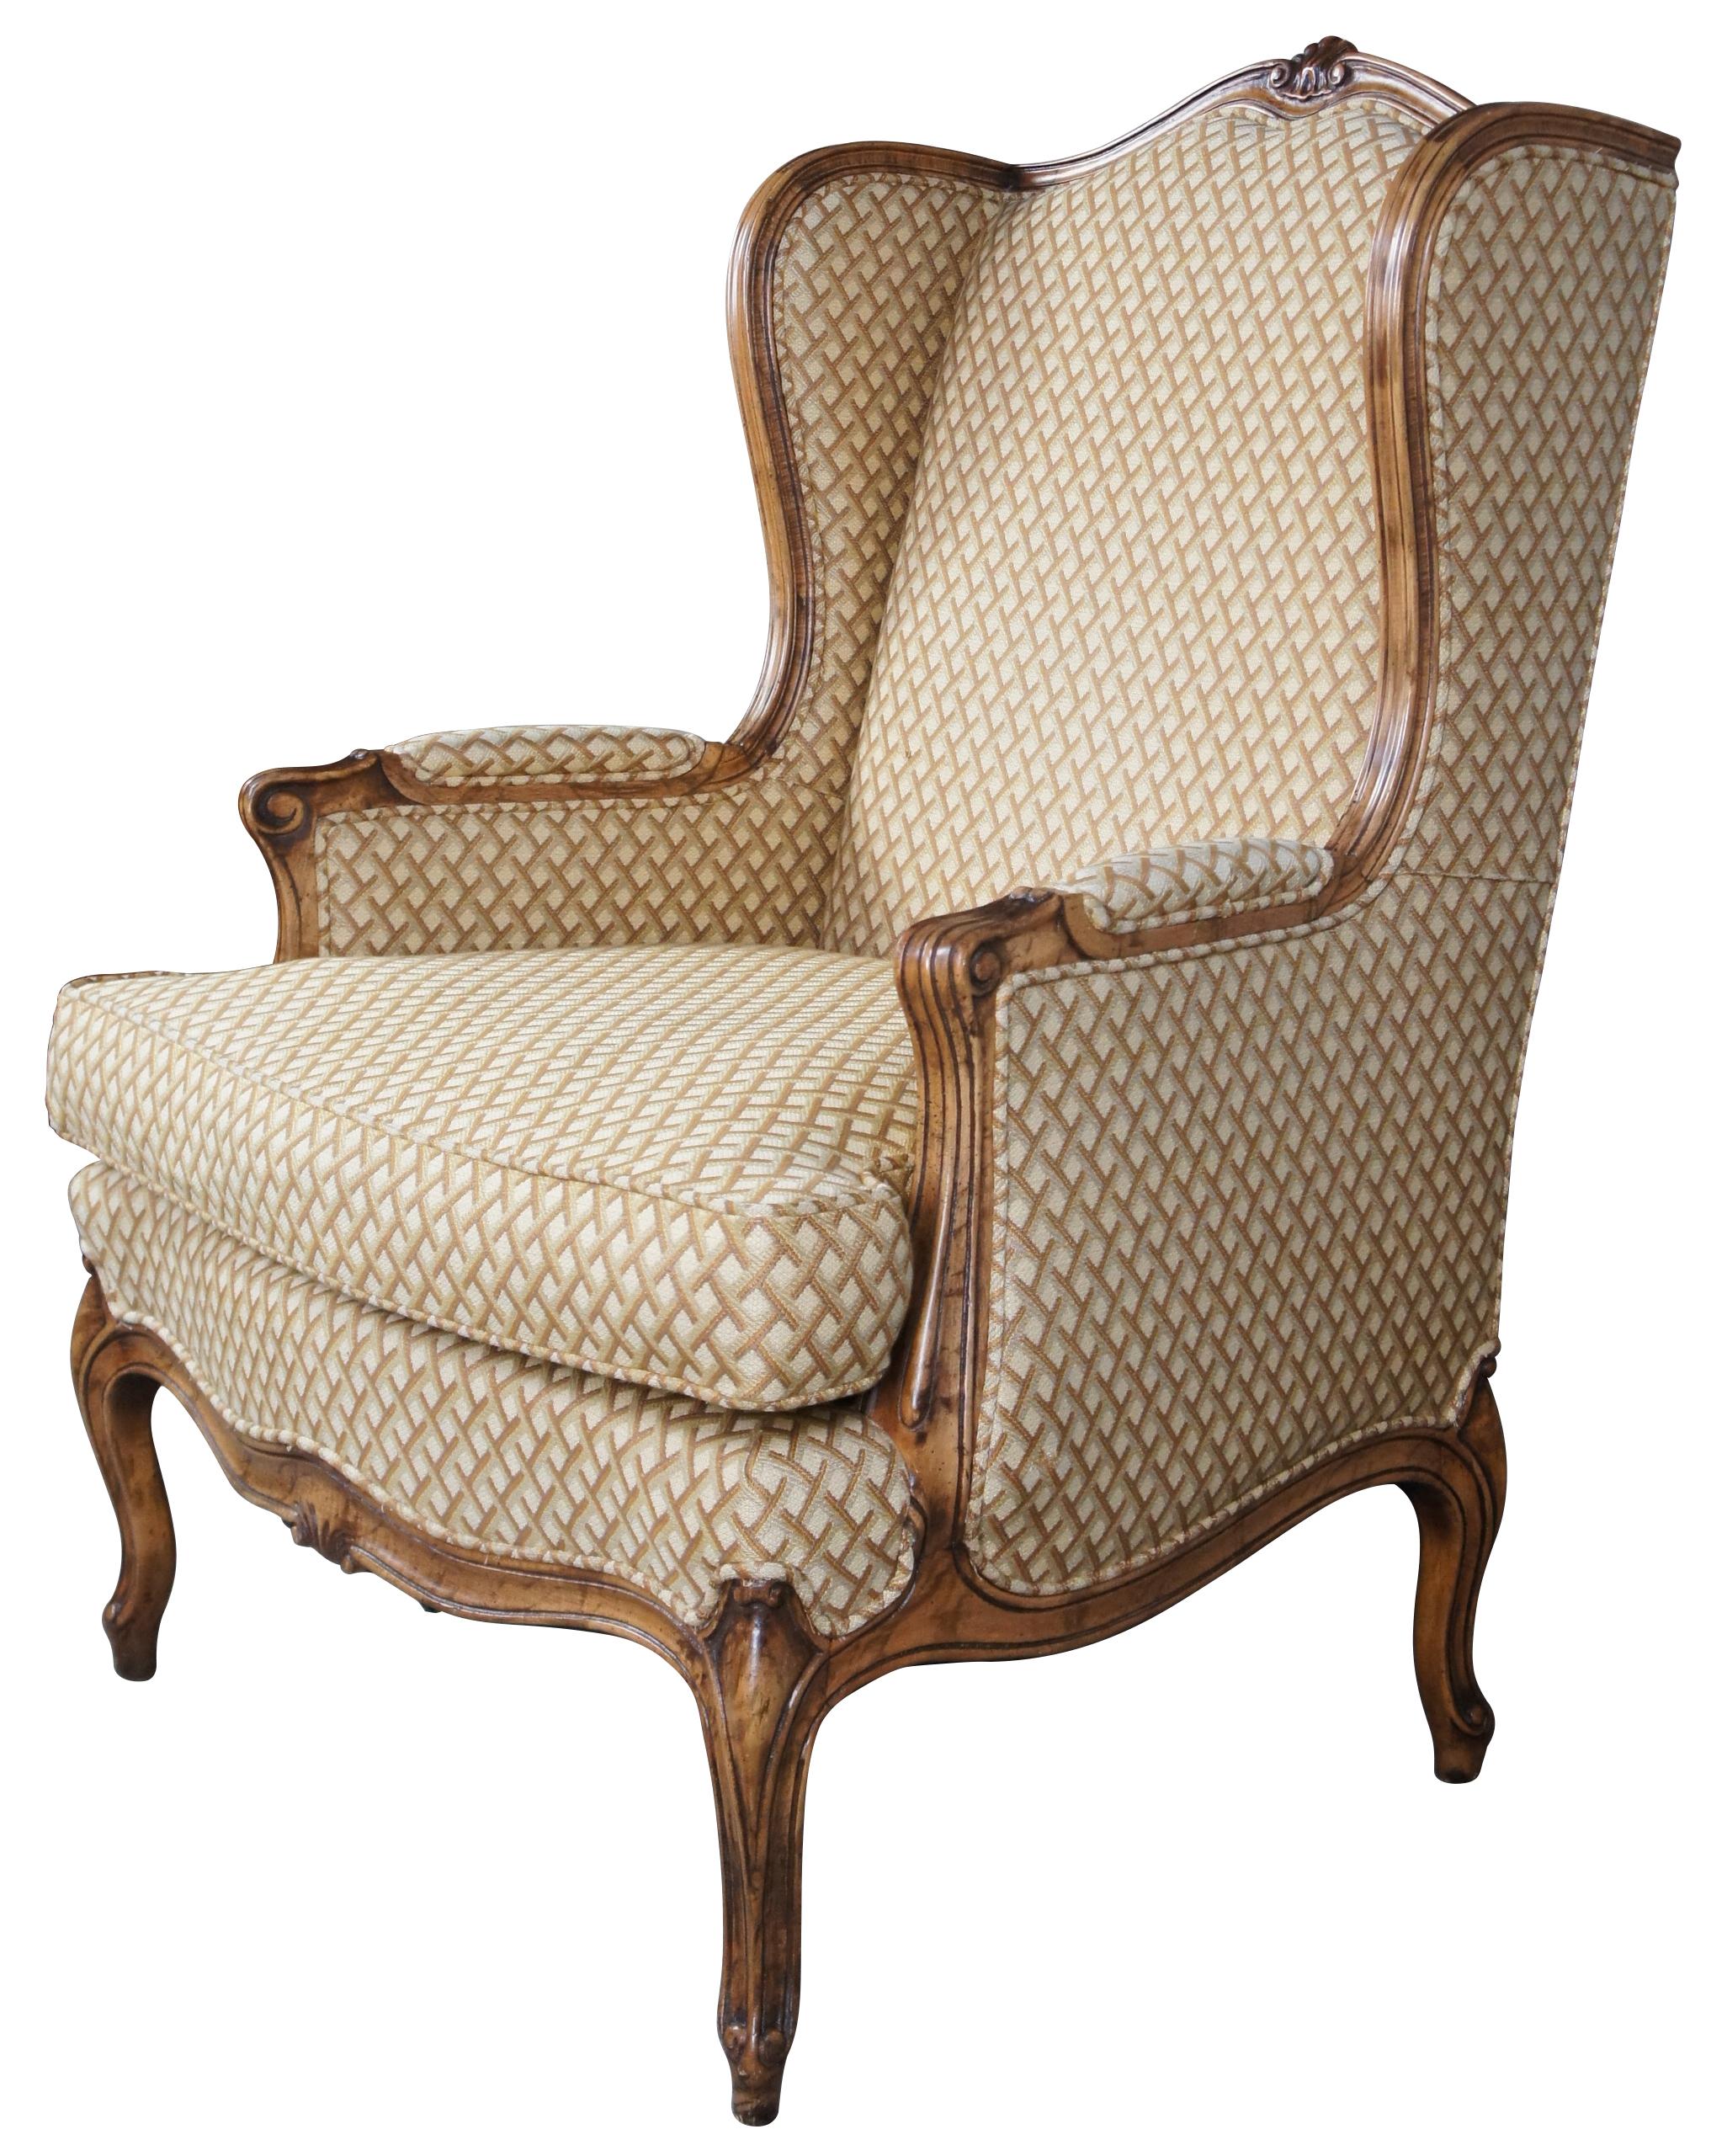 Hickory Chair Collectors Mix Wingback Arm Chair, circa 1960s. Style no 5012-25

Made from walnut with a cognac finish upholstered in Mauve & Brown Lattice pattern fabric.  An elegant contoured shape with scalloped accents, padded scrolled arms and